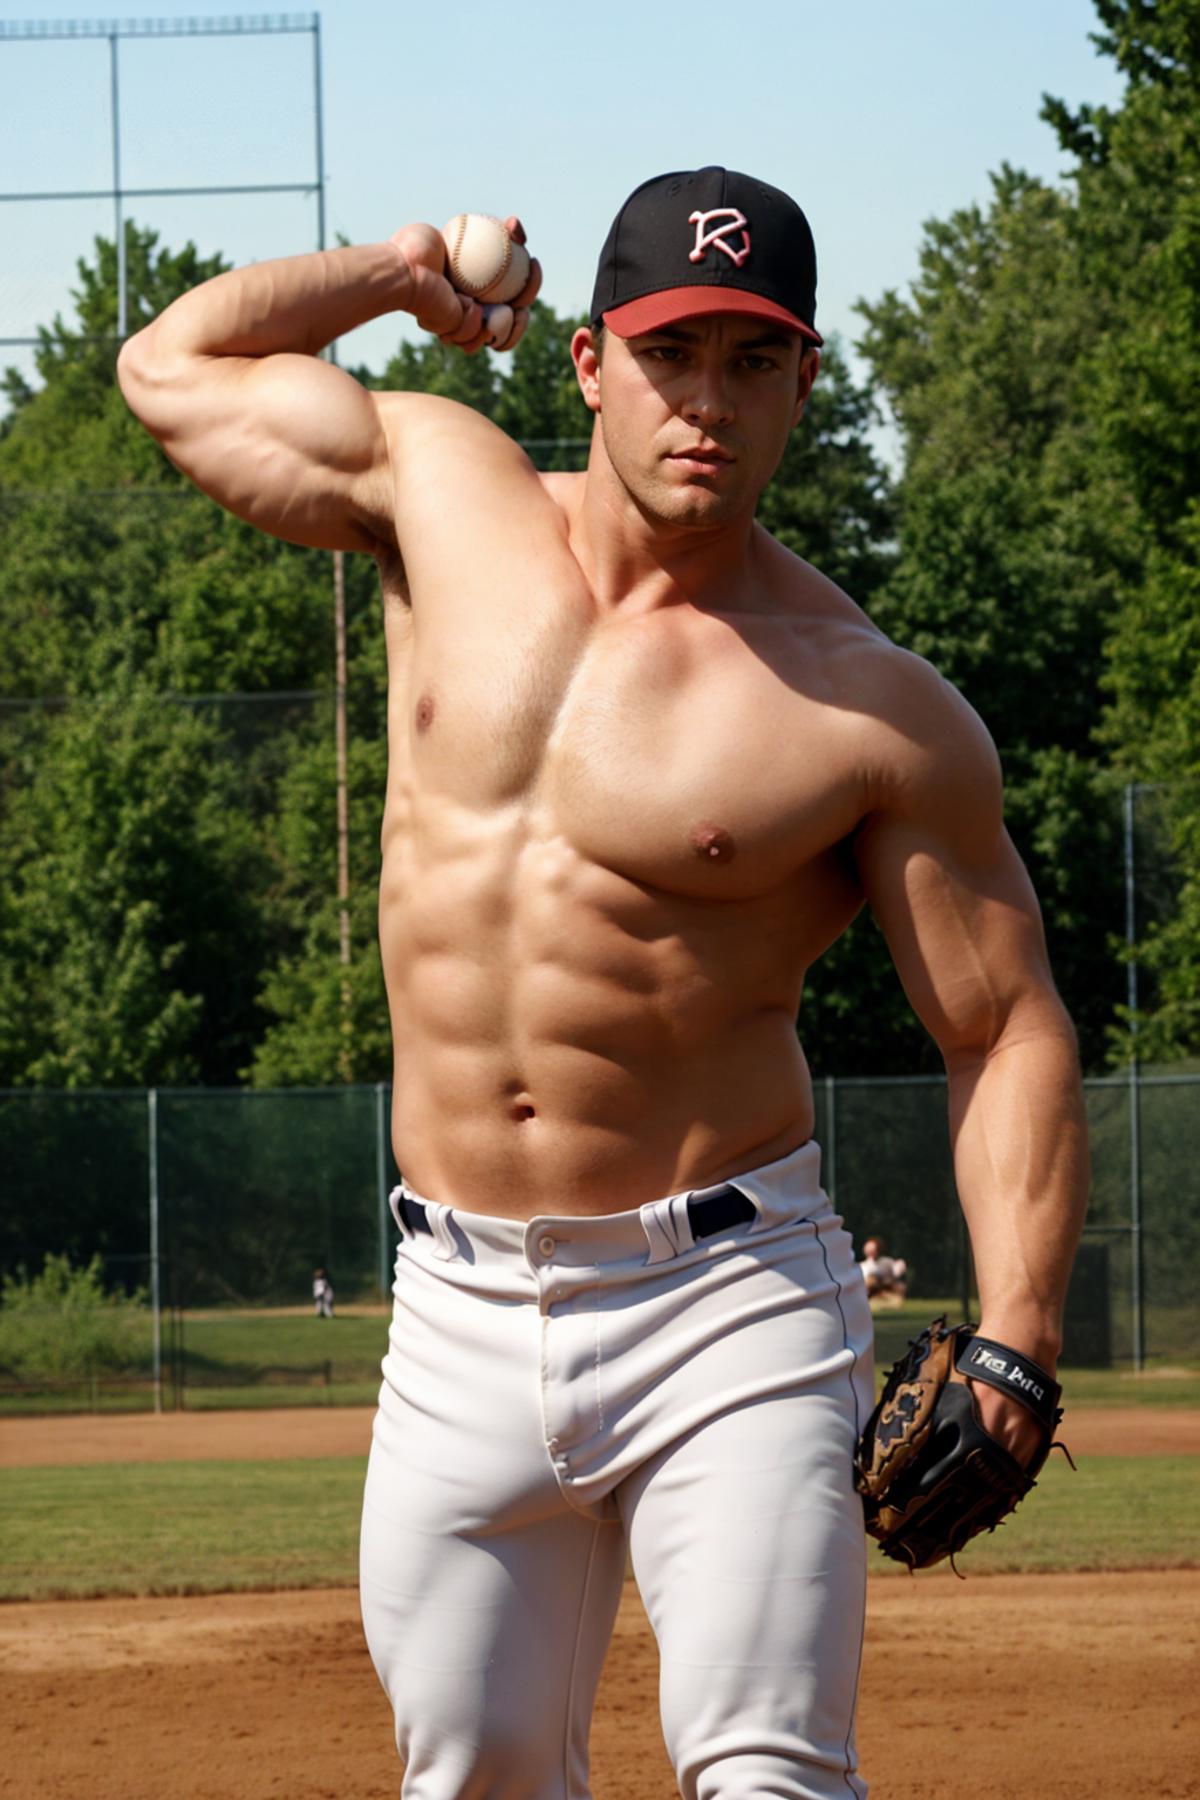 Sexy Baseball Player image by Kairen92